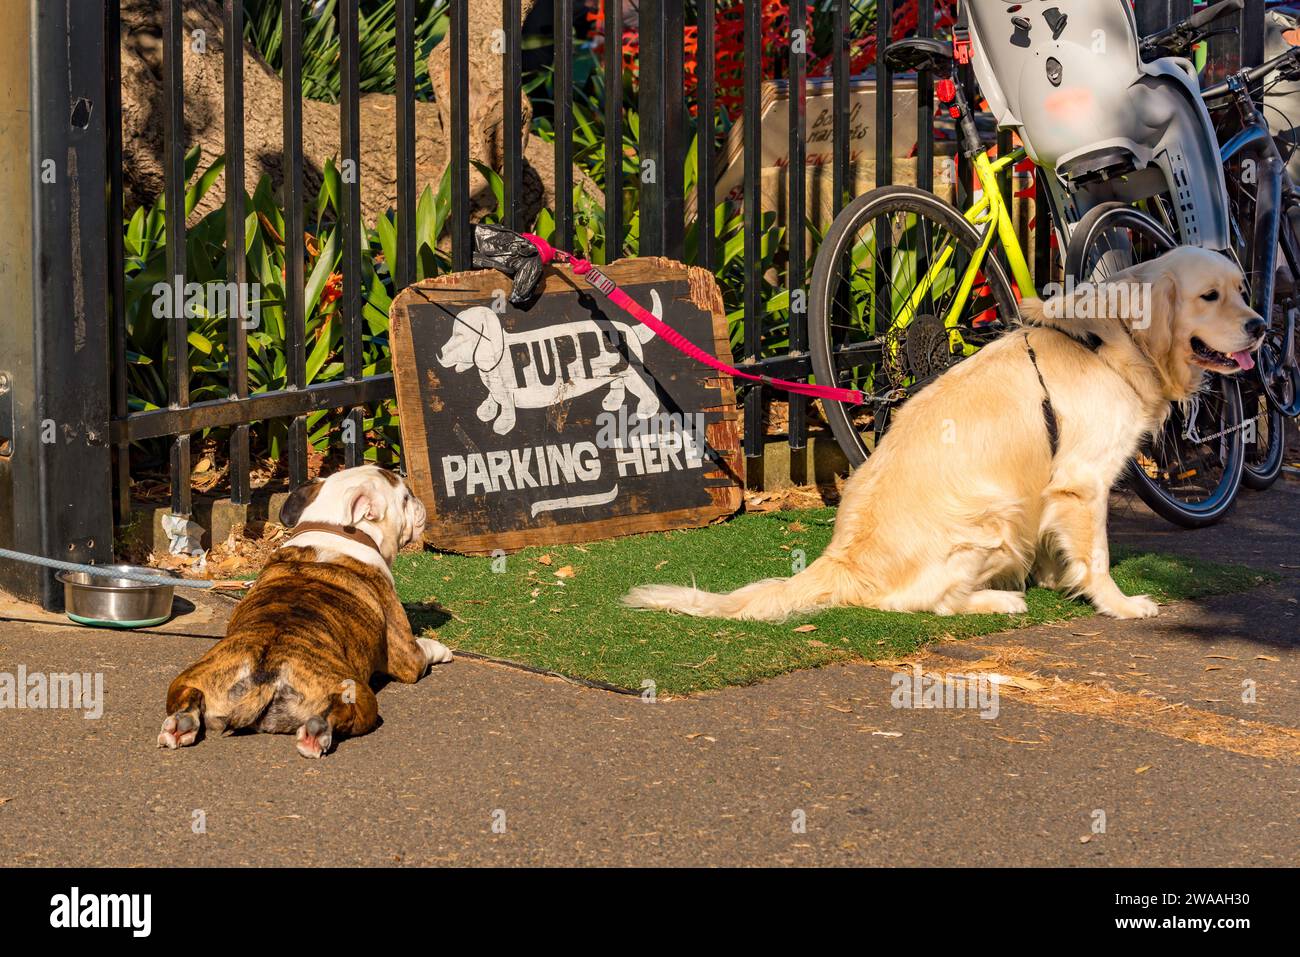 A bulldog and a Golden Retriever waiting tied up at a dog or puppy parking sign at the Bondi Beach Farmers Markets at North Bondi in Sydney, Australia Stock Photo